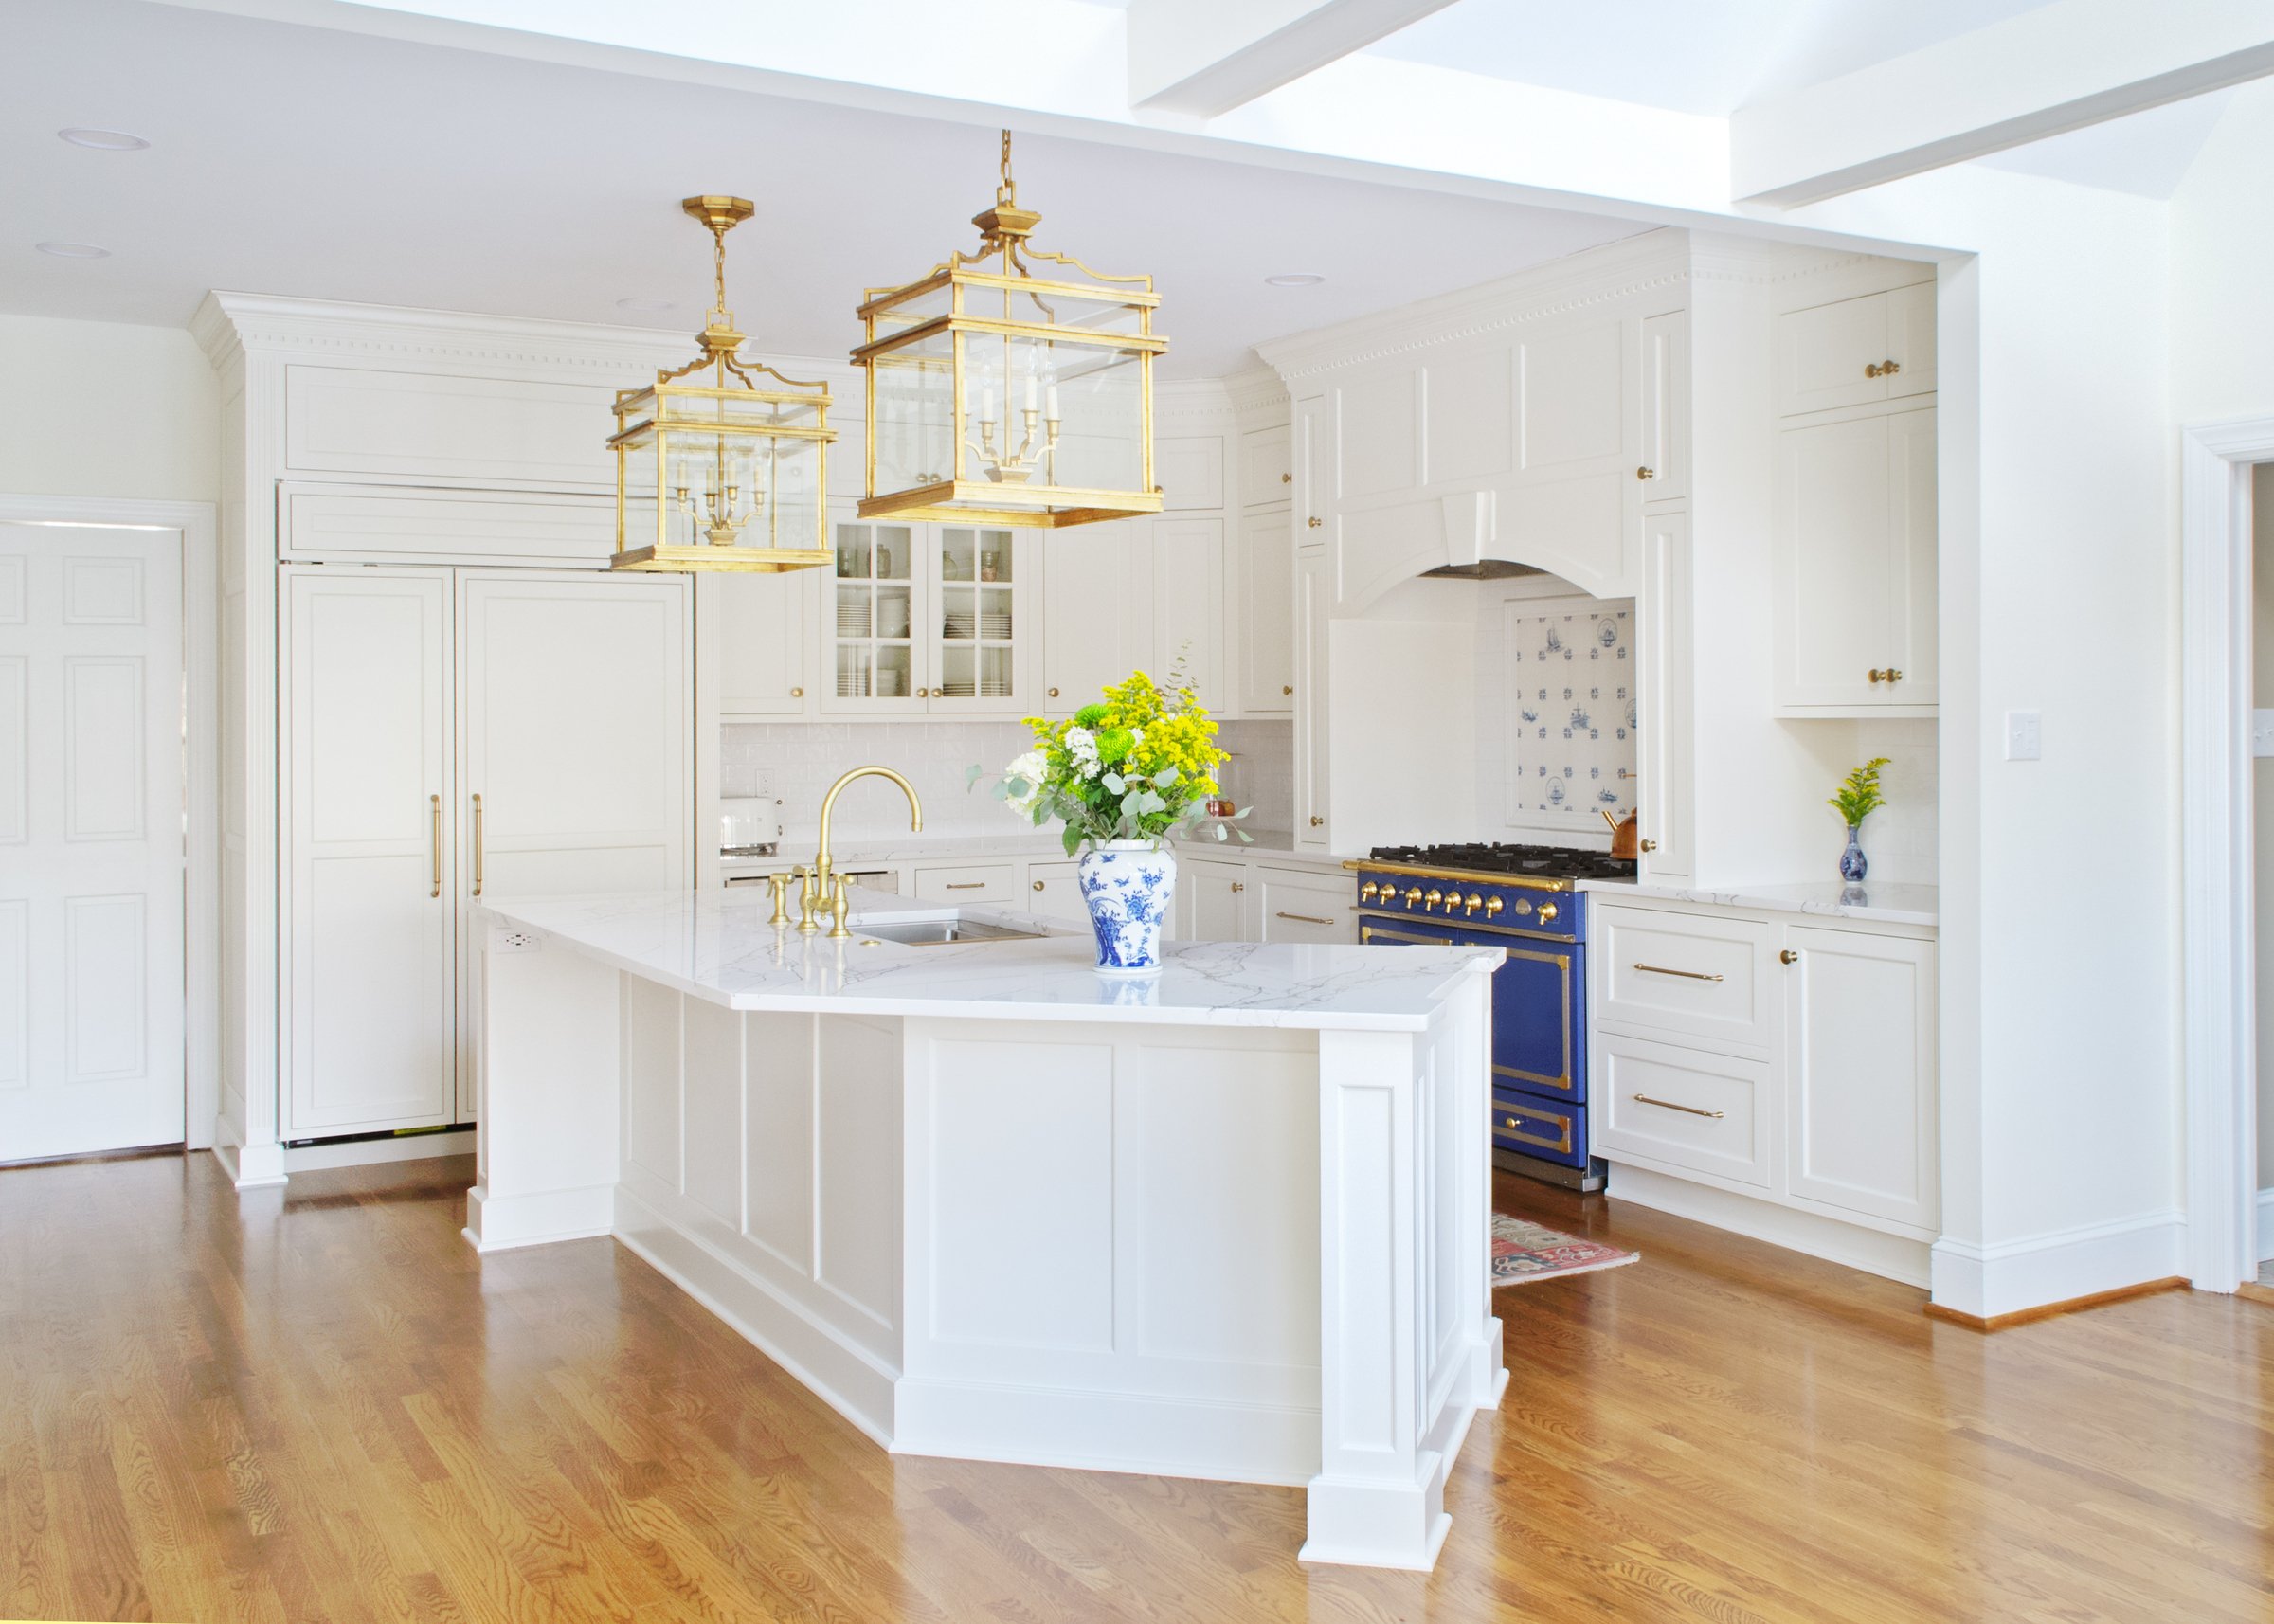  Custom Kitchens provides luxury kitchen and bath renovations with over 65 years of experience! 